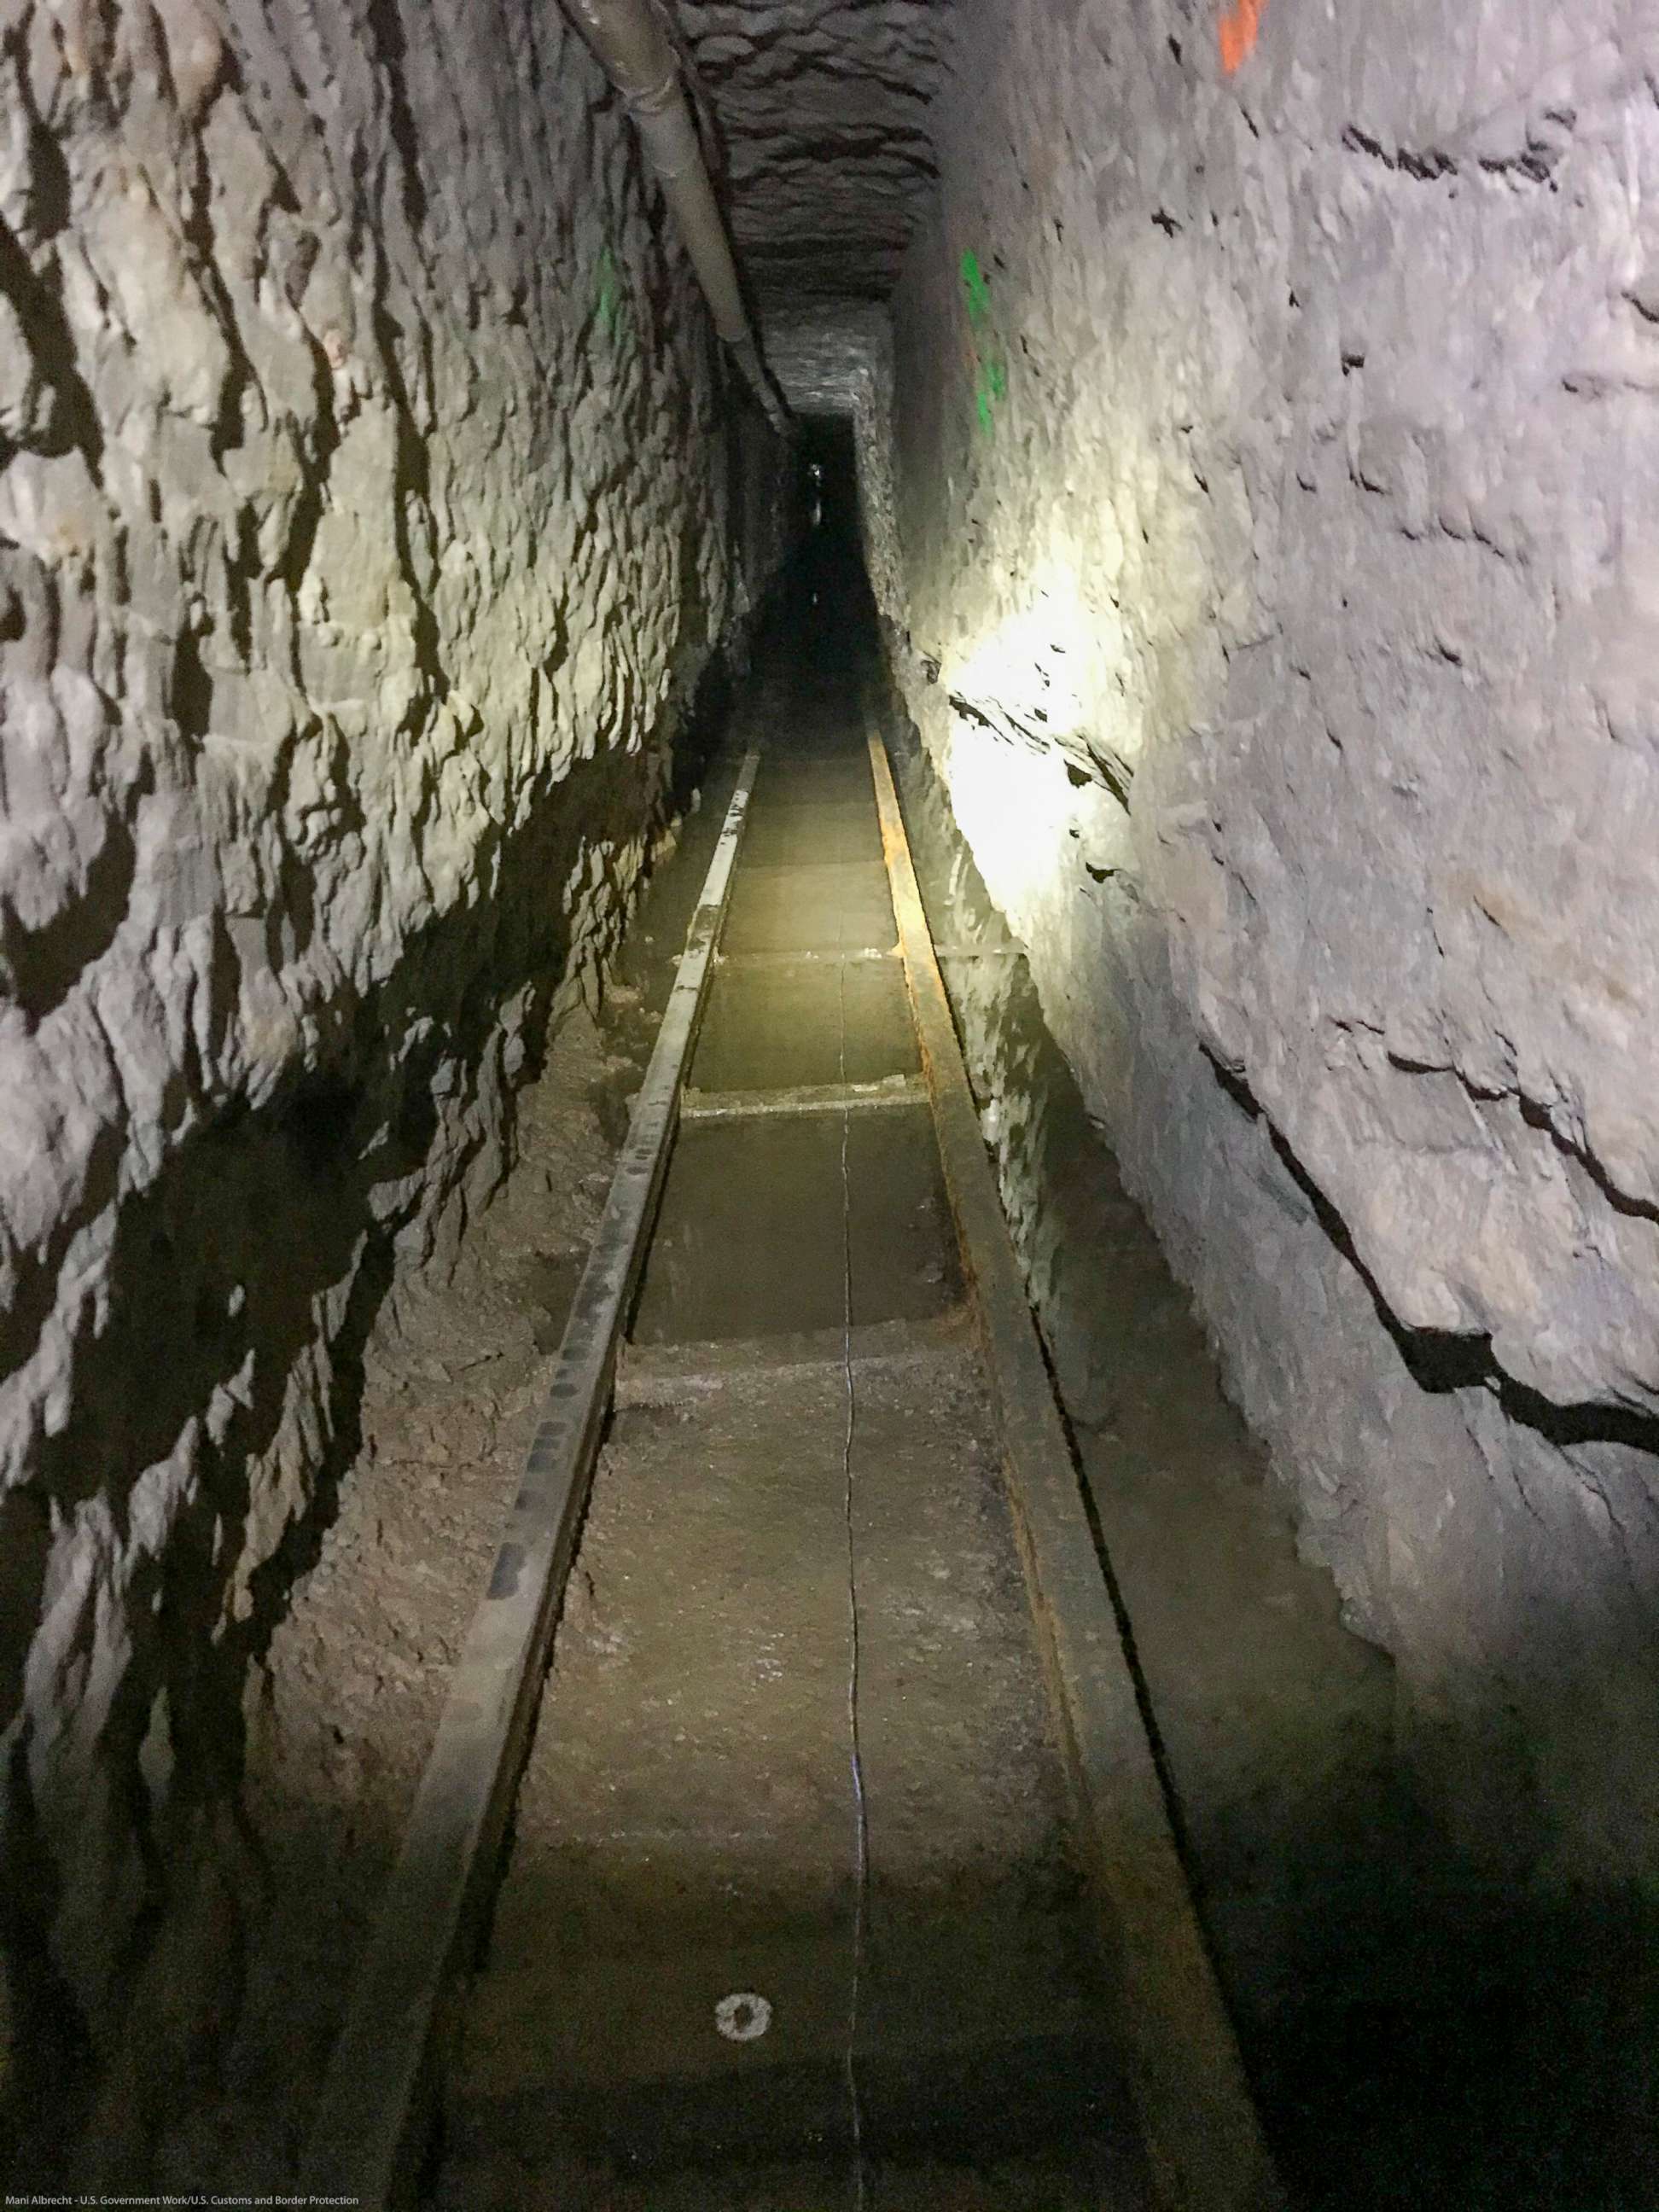 PHOTO: Handout photo shows the longest illicit cross-border tunnel ever discovered along the Southwest border after a multi-year, inter-agency investigation by U.S. Border Patrol San Diego Sector and partners. 